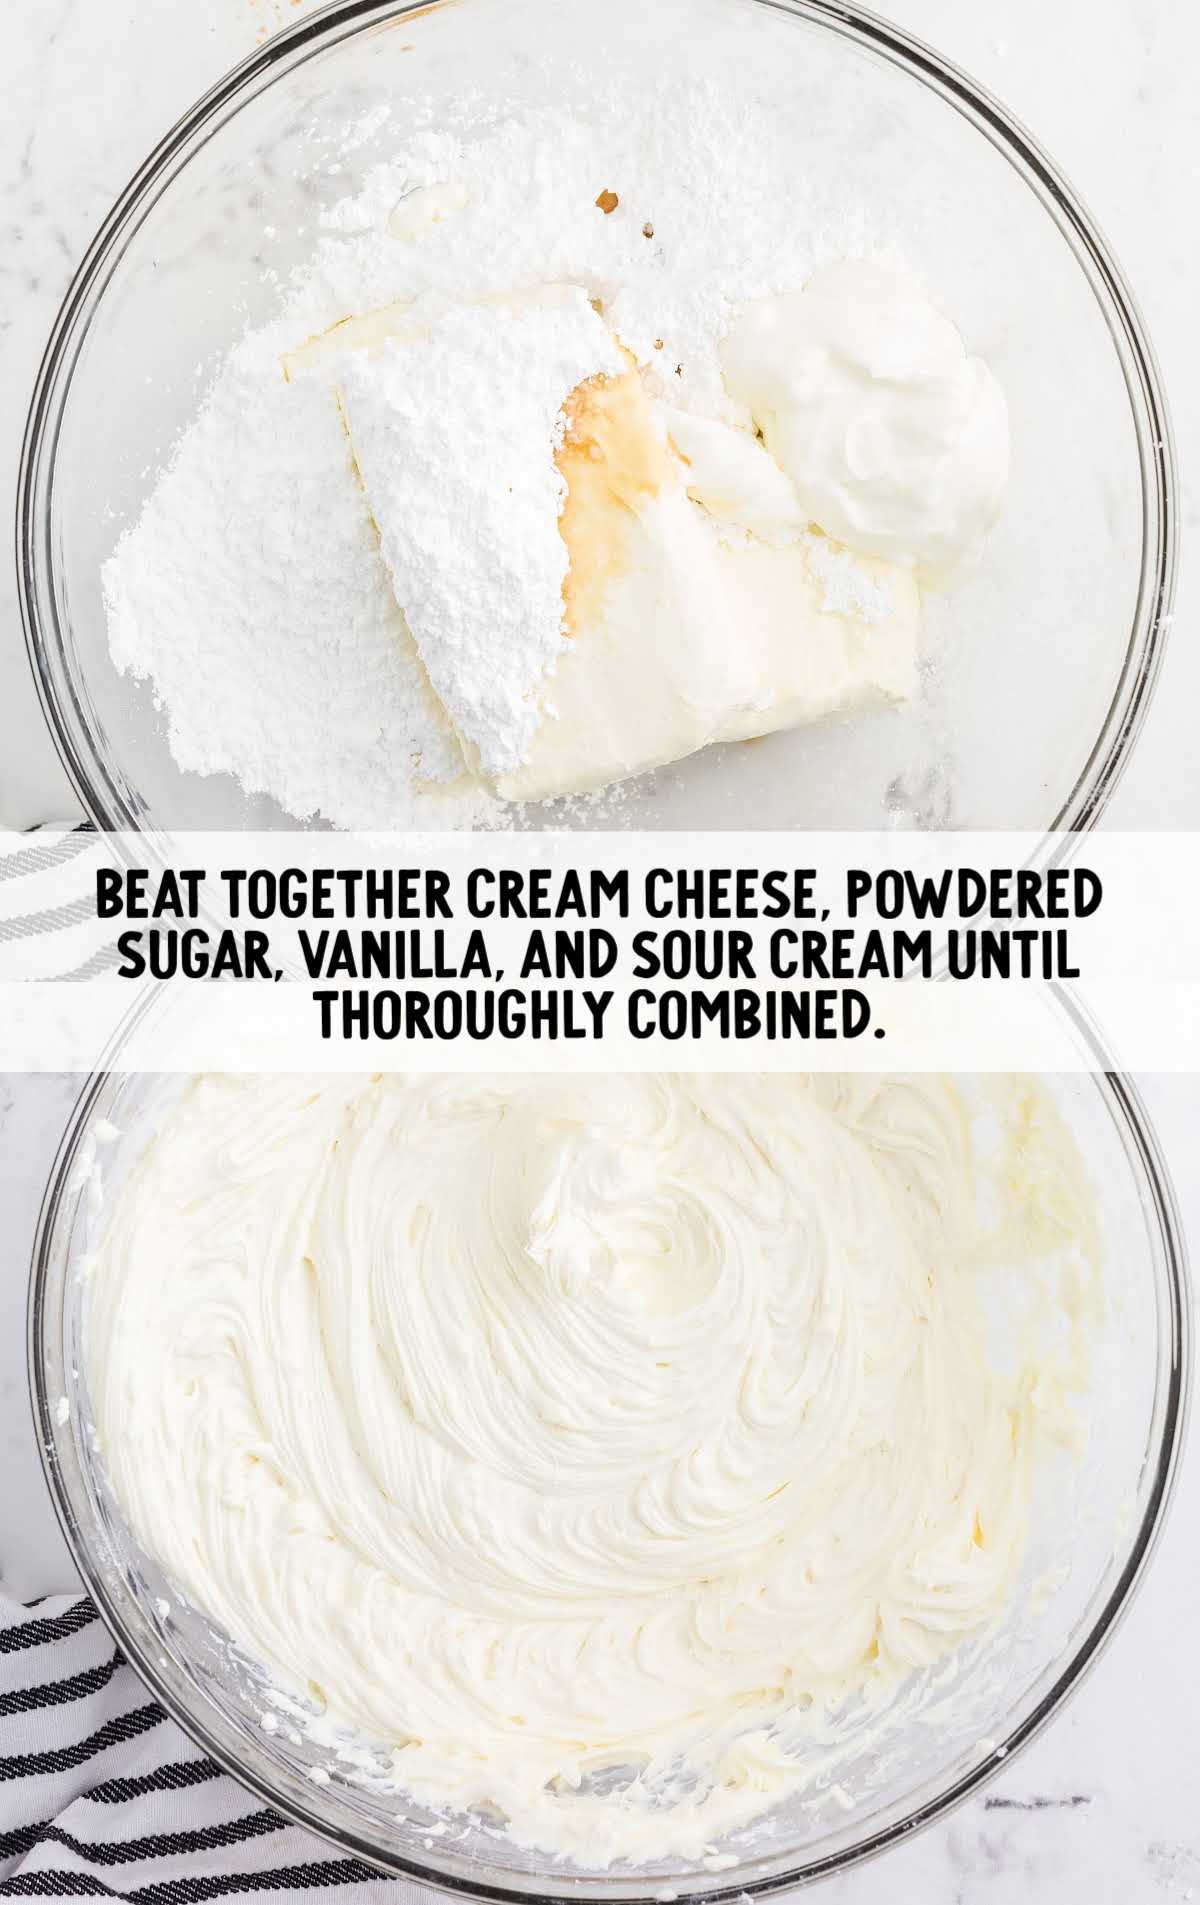 cream cheese, powdered sugar, vanilla extract, and sour cream beat together in a bowl